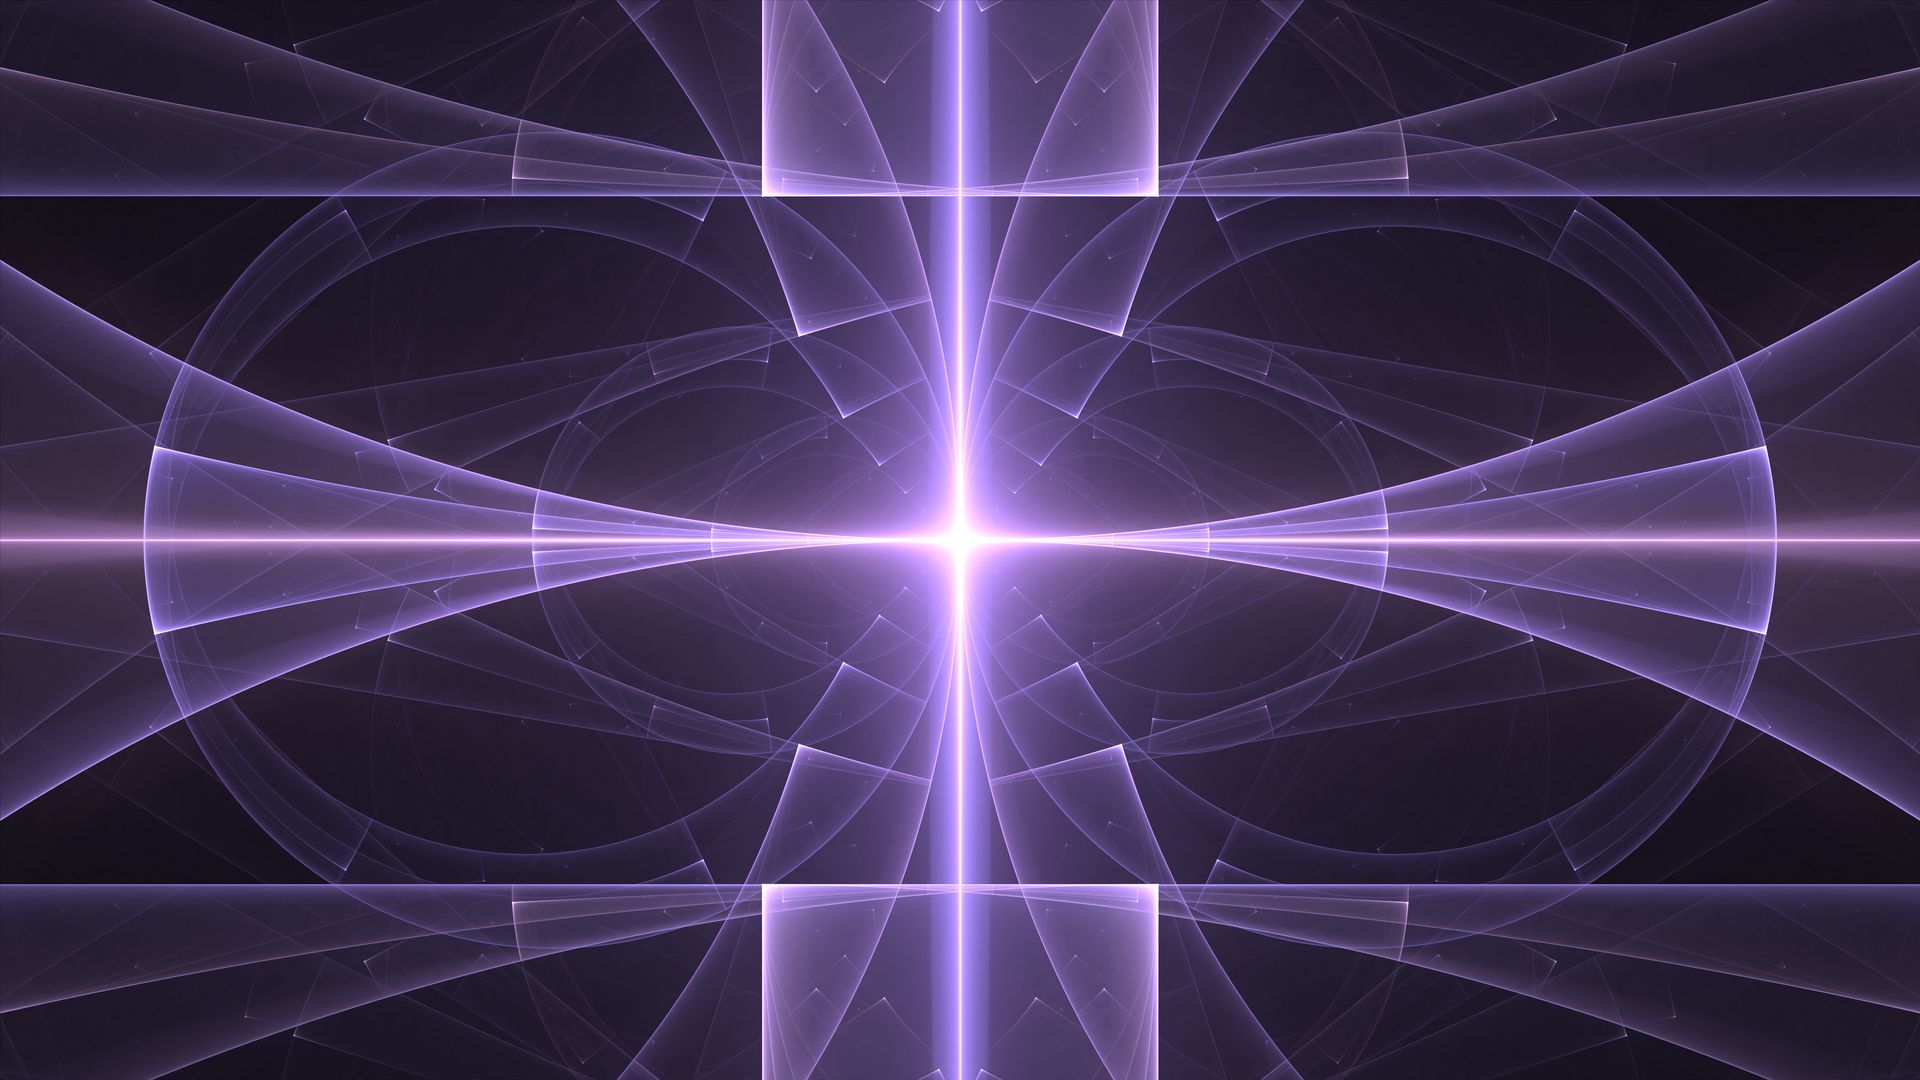 Download wallpaper 1920x1080 rays, glow, intersection, shapes ...